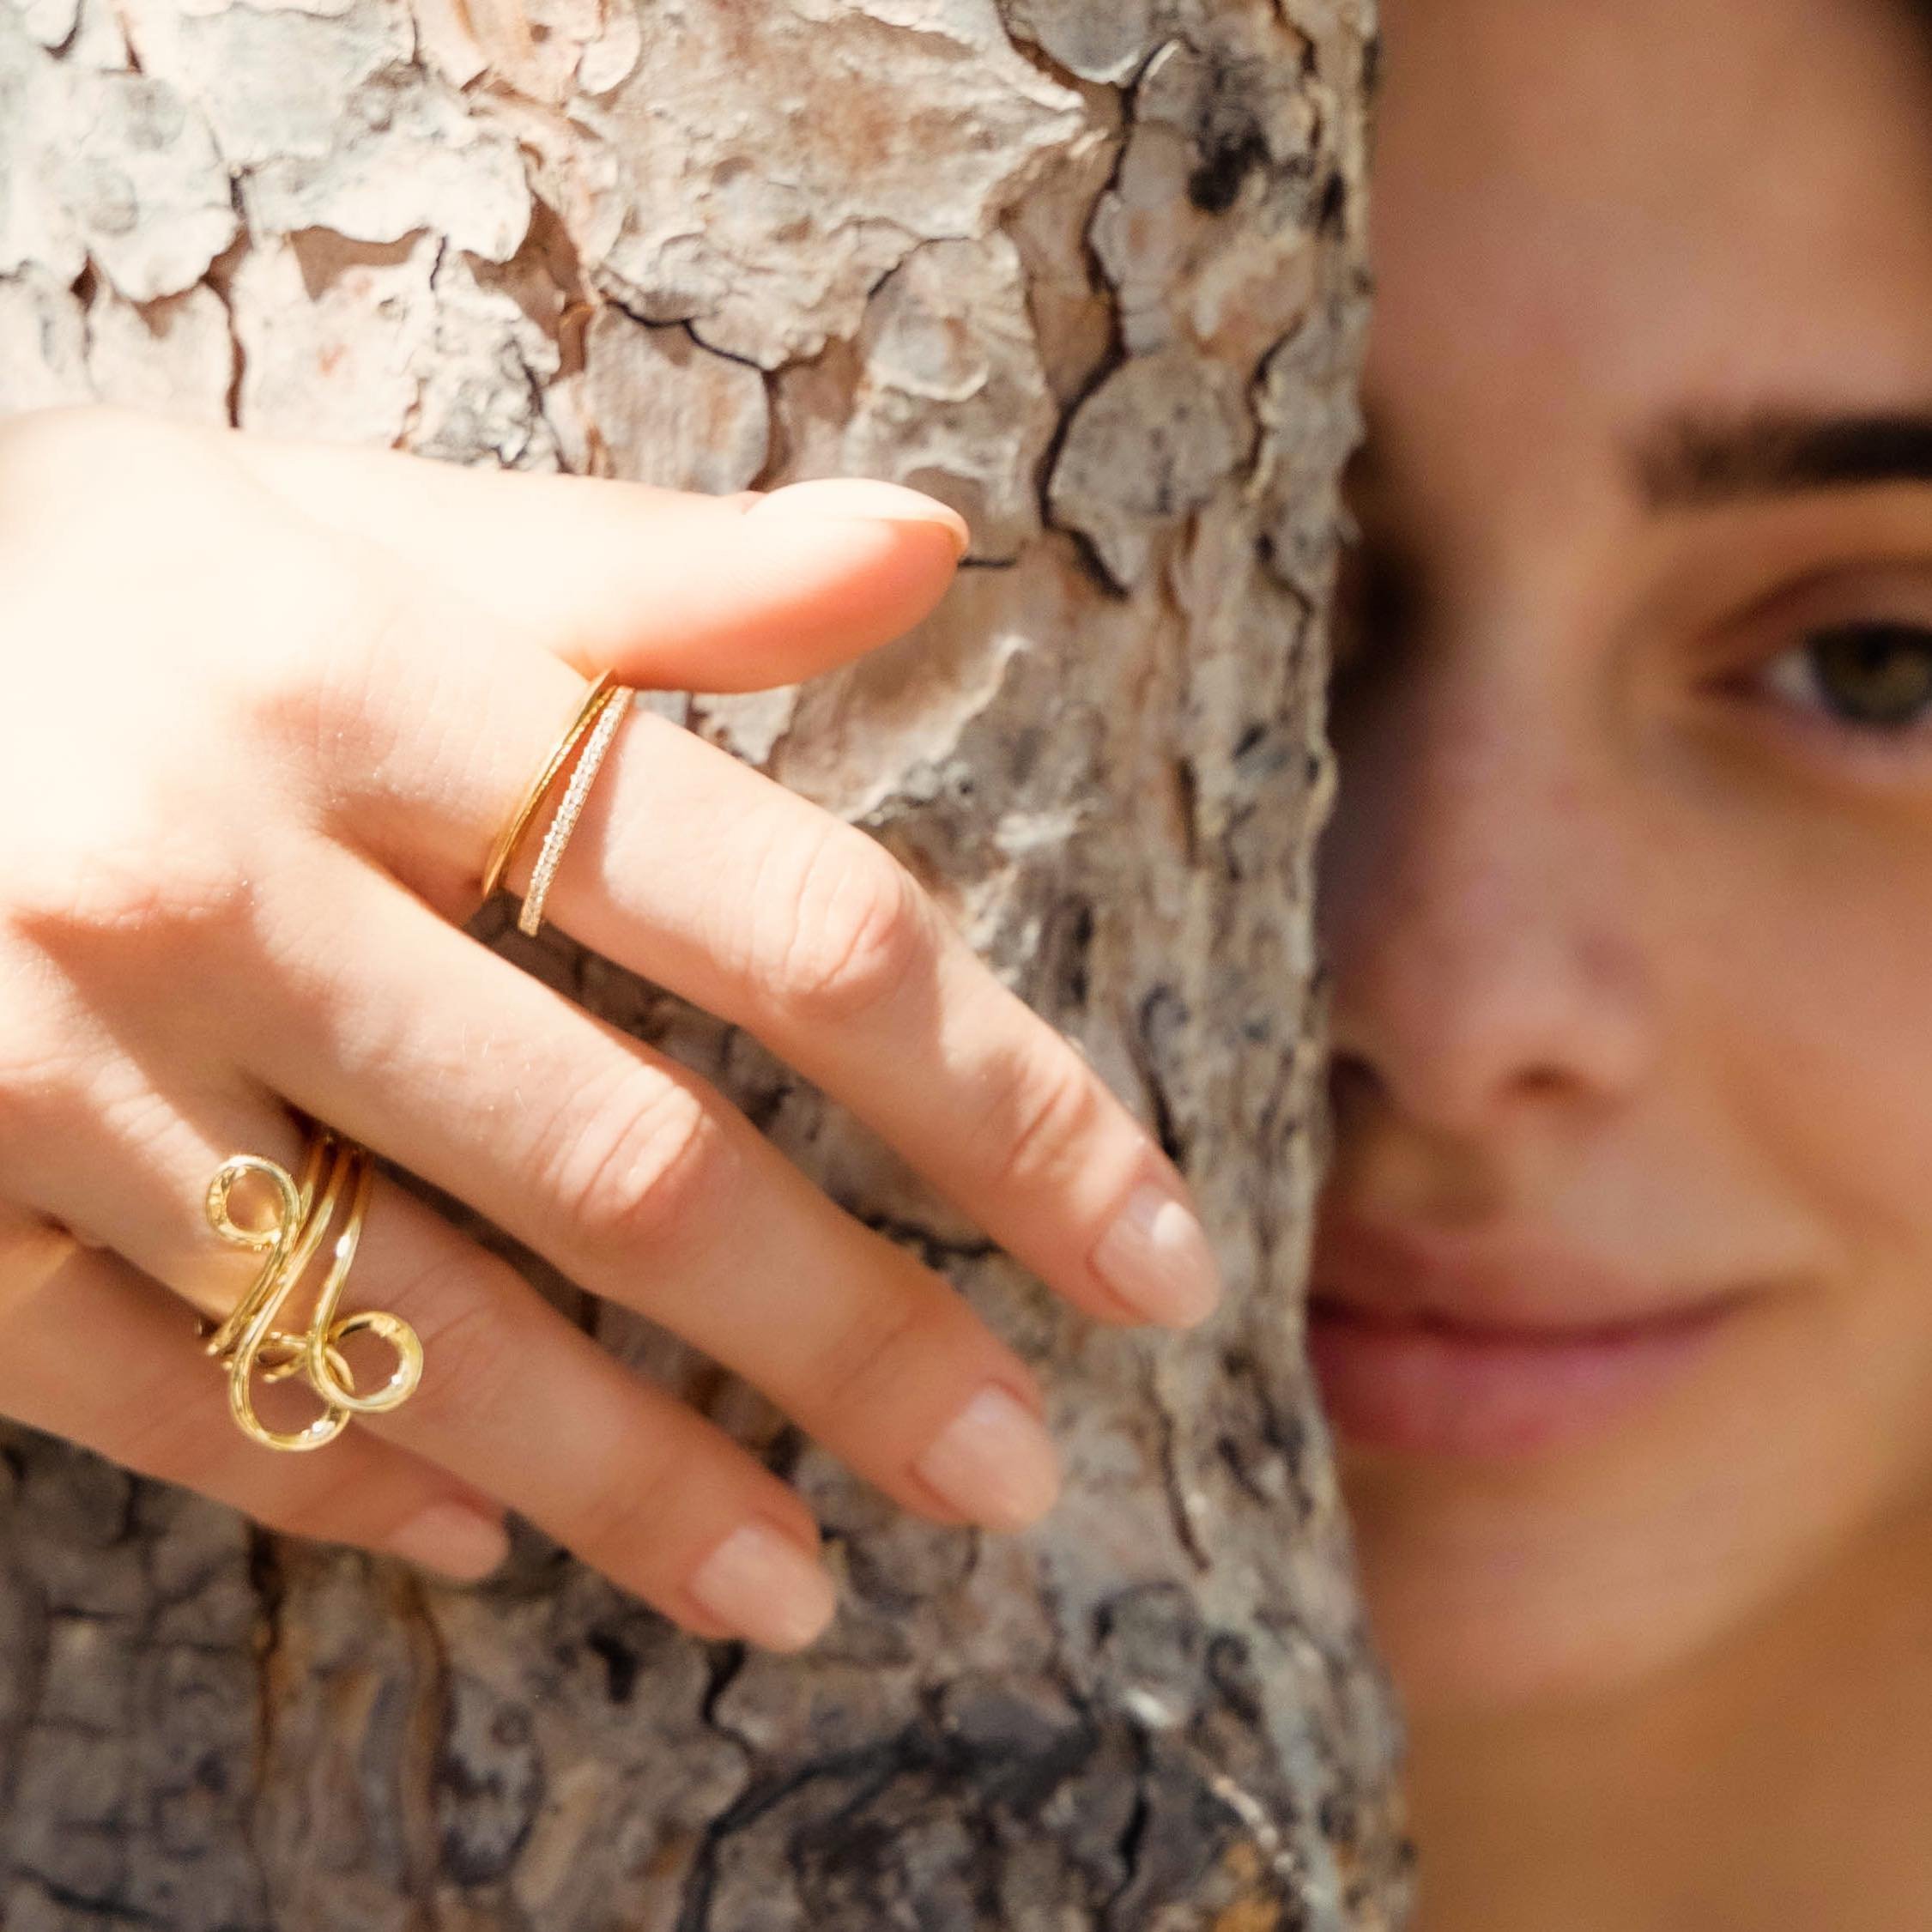 Stacking fine, 18ct gold &ldquo;kyma&rdquo; rings, inspired by the waves of the Aegean Sea.

Greek summer calling

#sofiannijewellery #stackingrings #kyma

Photo by @doratiniou.photography